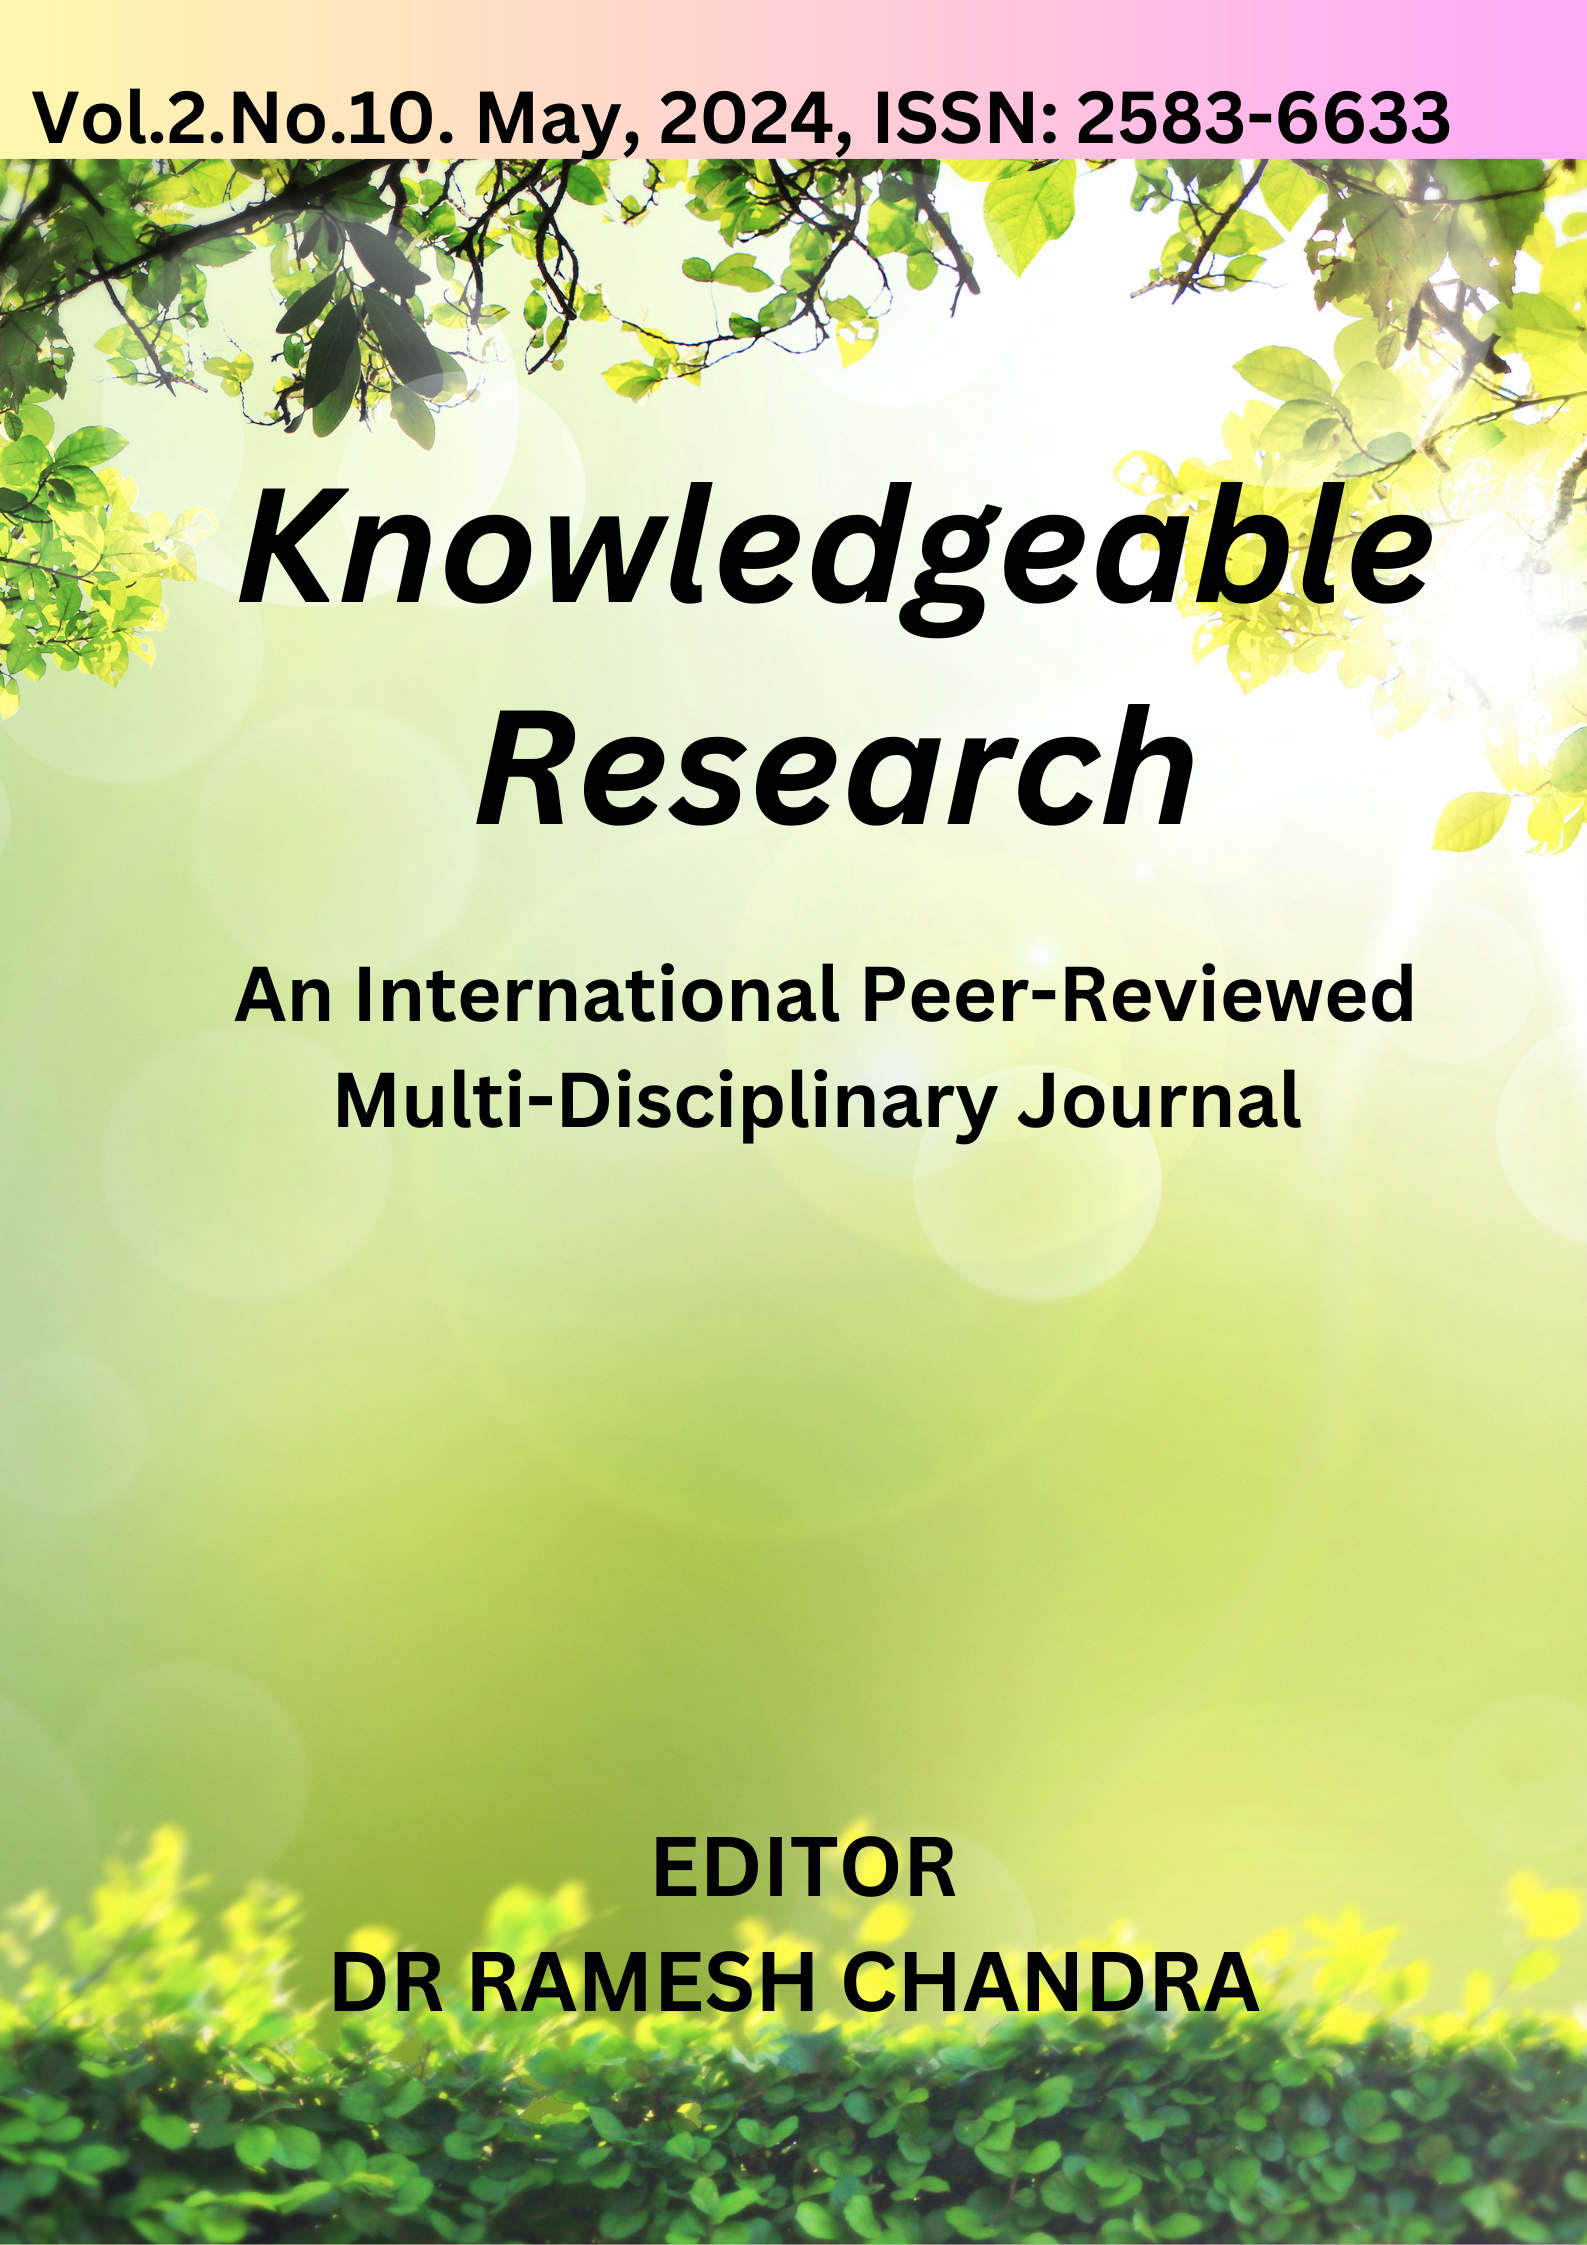 					View Vol. 2 No. 10 (2024): Knowledgeable Research (KR)
				